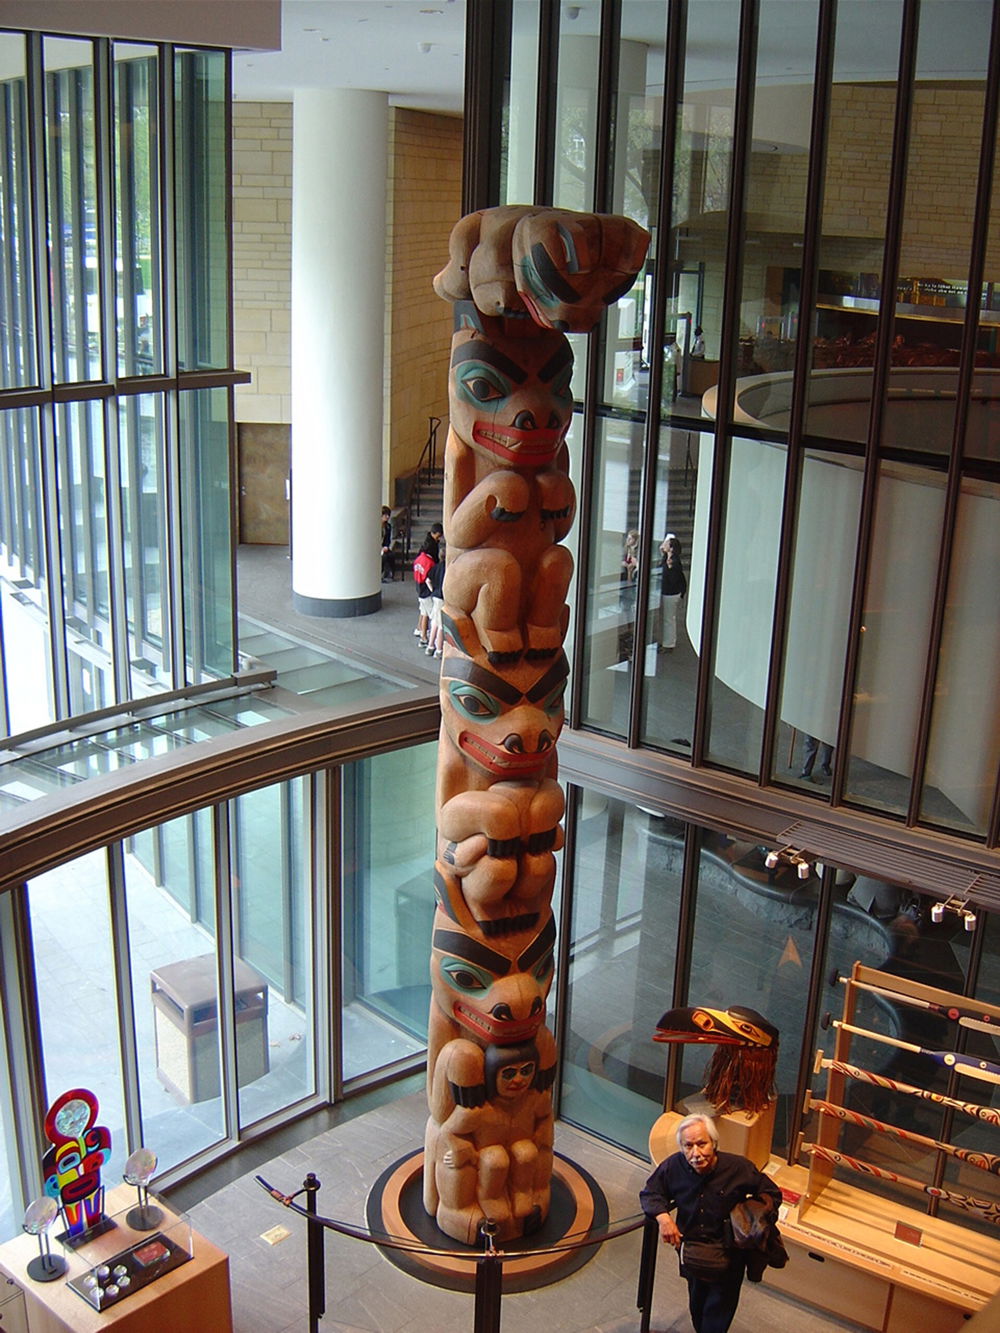 Nathan P Jackson stands below a towering totem pole on display in the Smithsonian National Museum of the American Indian. The totem features Kaats who is at the bottom being held by the mama bear, his wife. Going up the pole, the three bear cubs are shown.